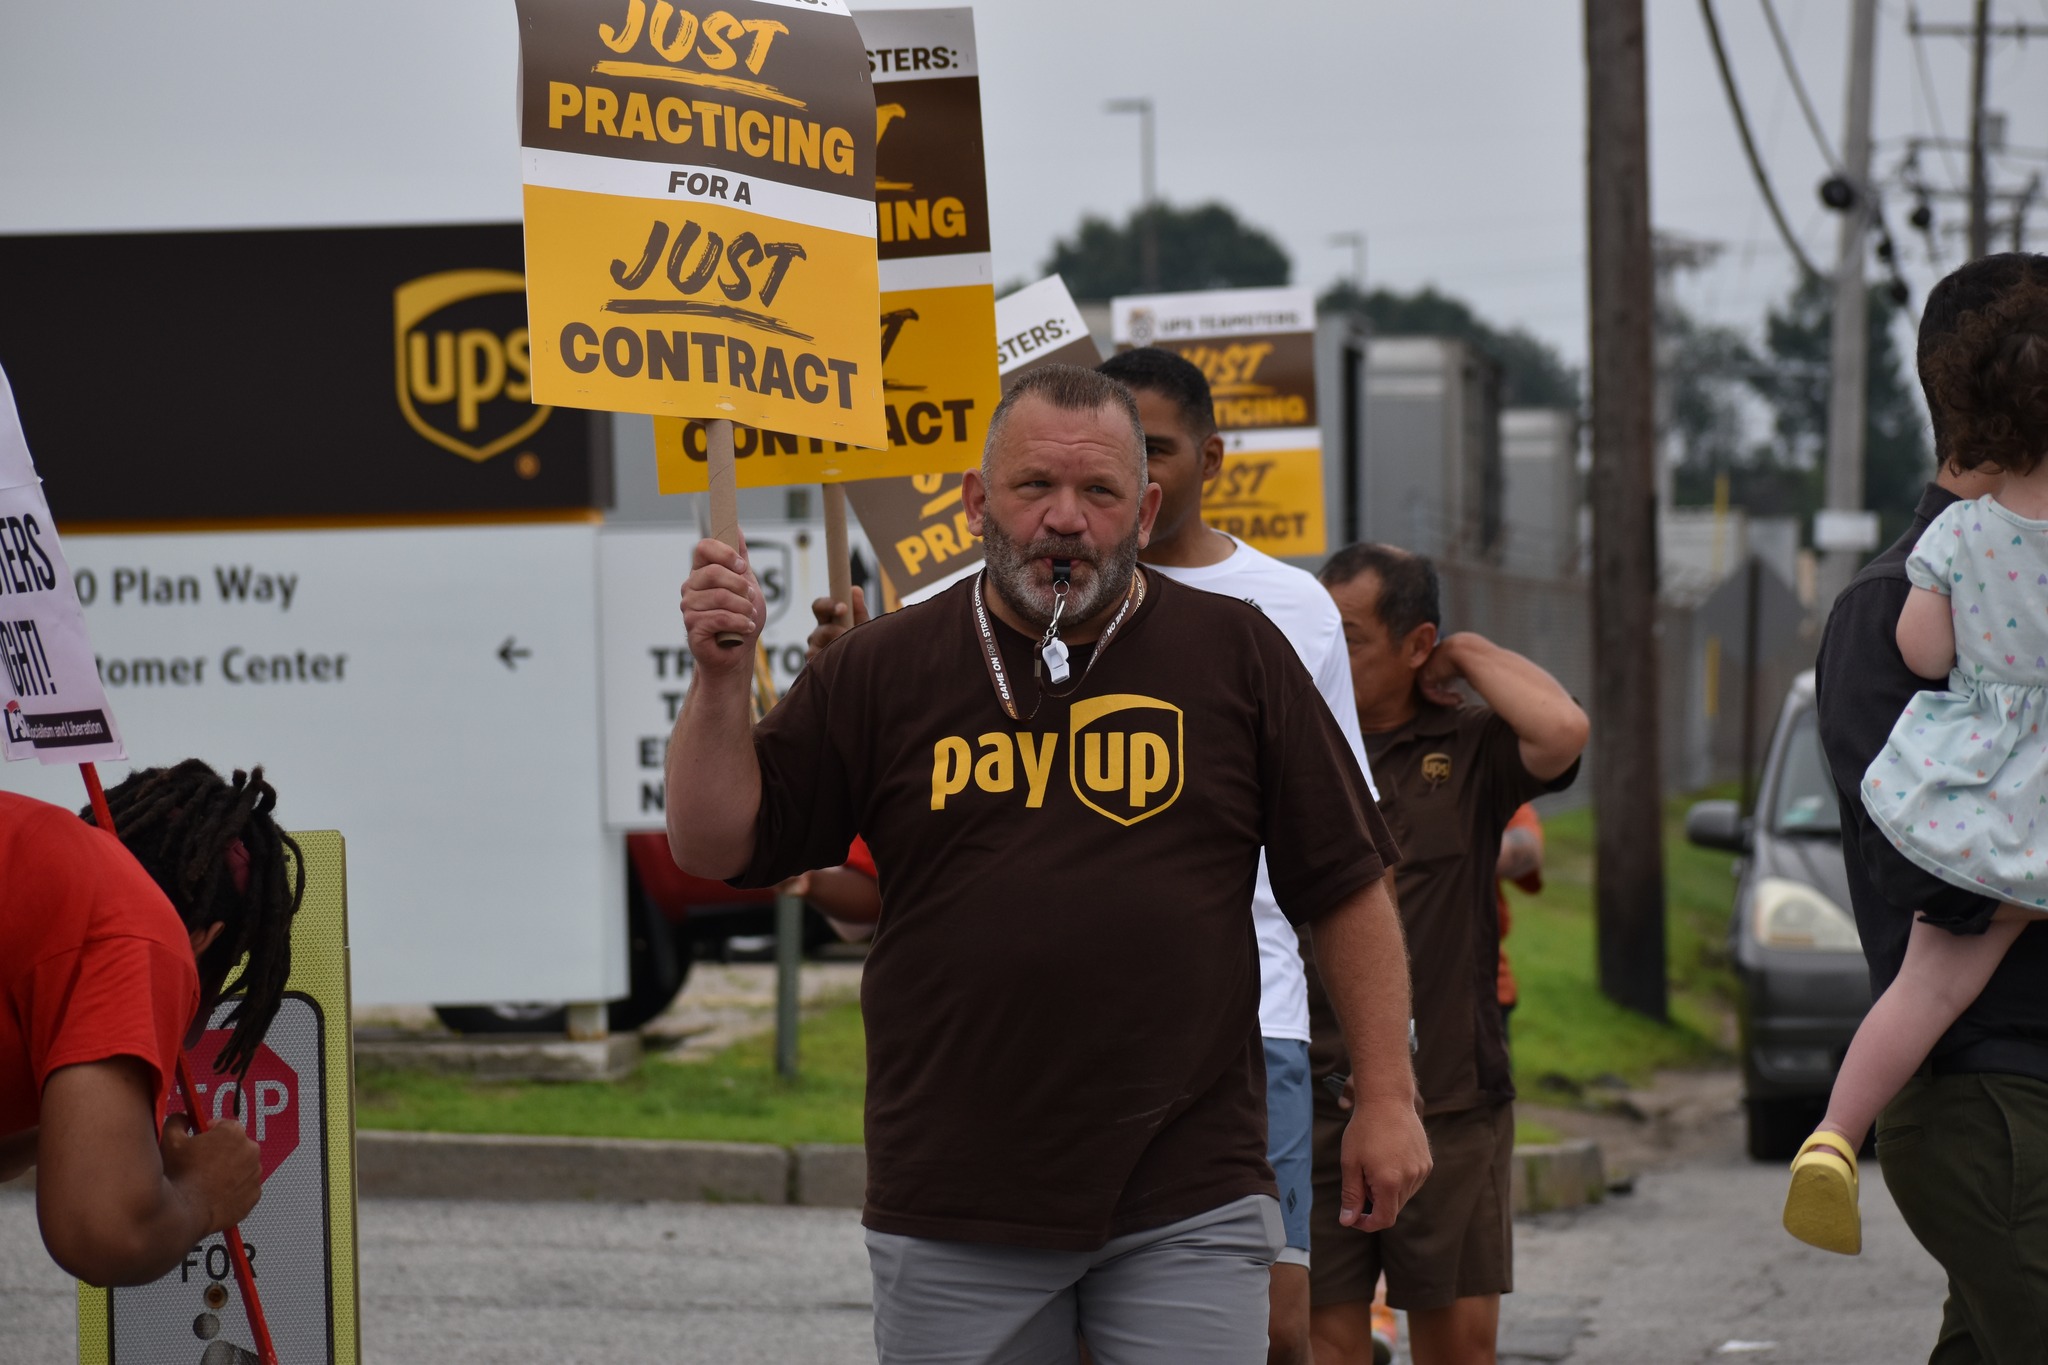 Just practicing for a just contract: UPS Teamsters demand fair pay and benefits